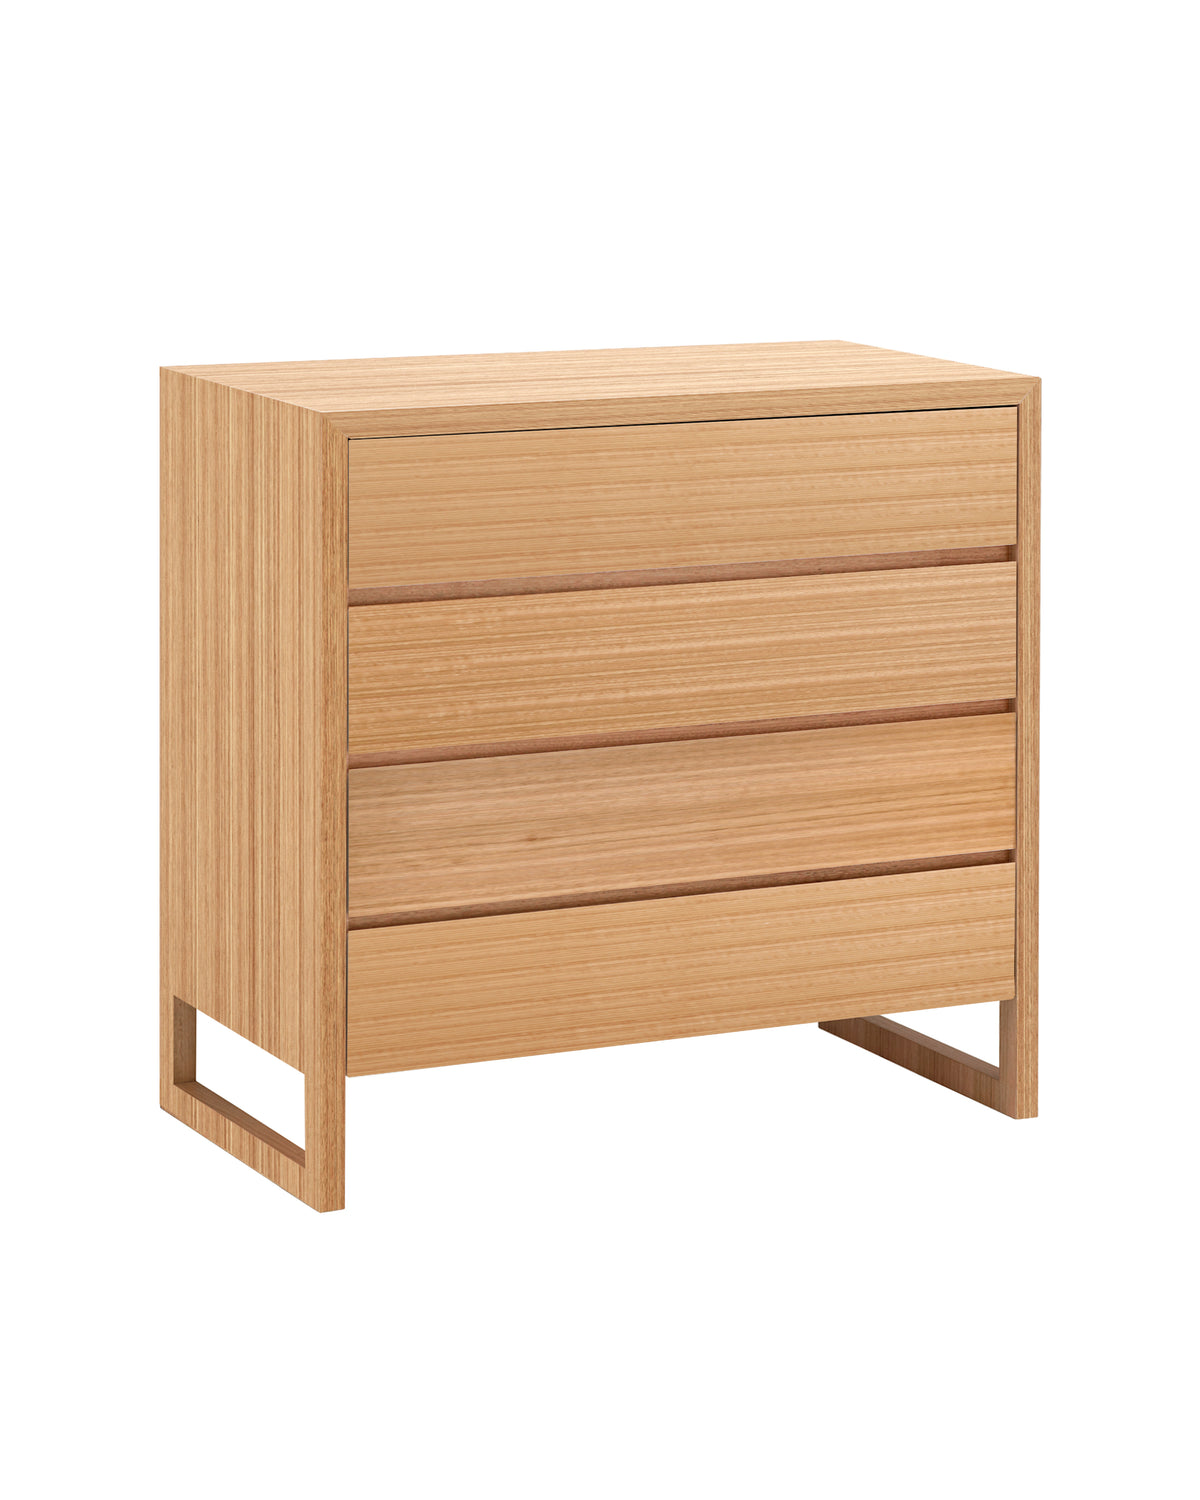 The Oak Box Chest of Drawers features a timber frame which encases itself around four timber drawers, concealing intricate mitred joinery with legs that flow into a continuous wrap to create classic simplicity.